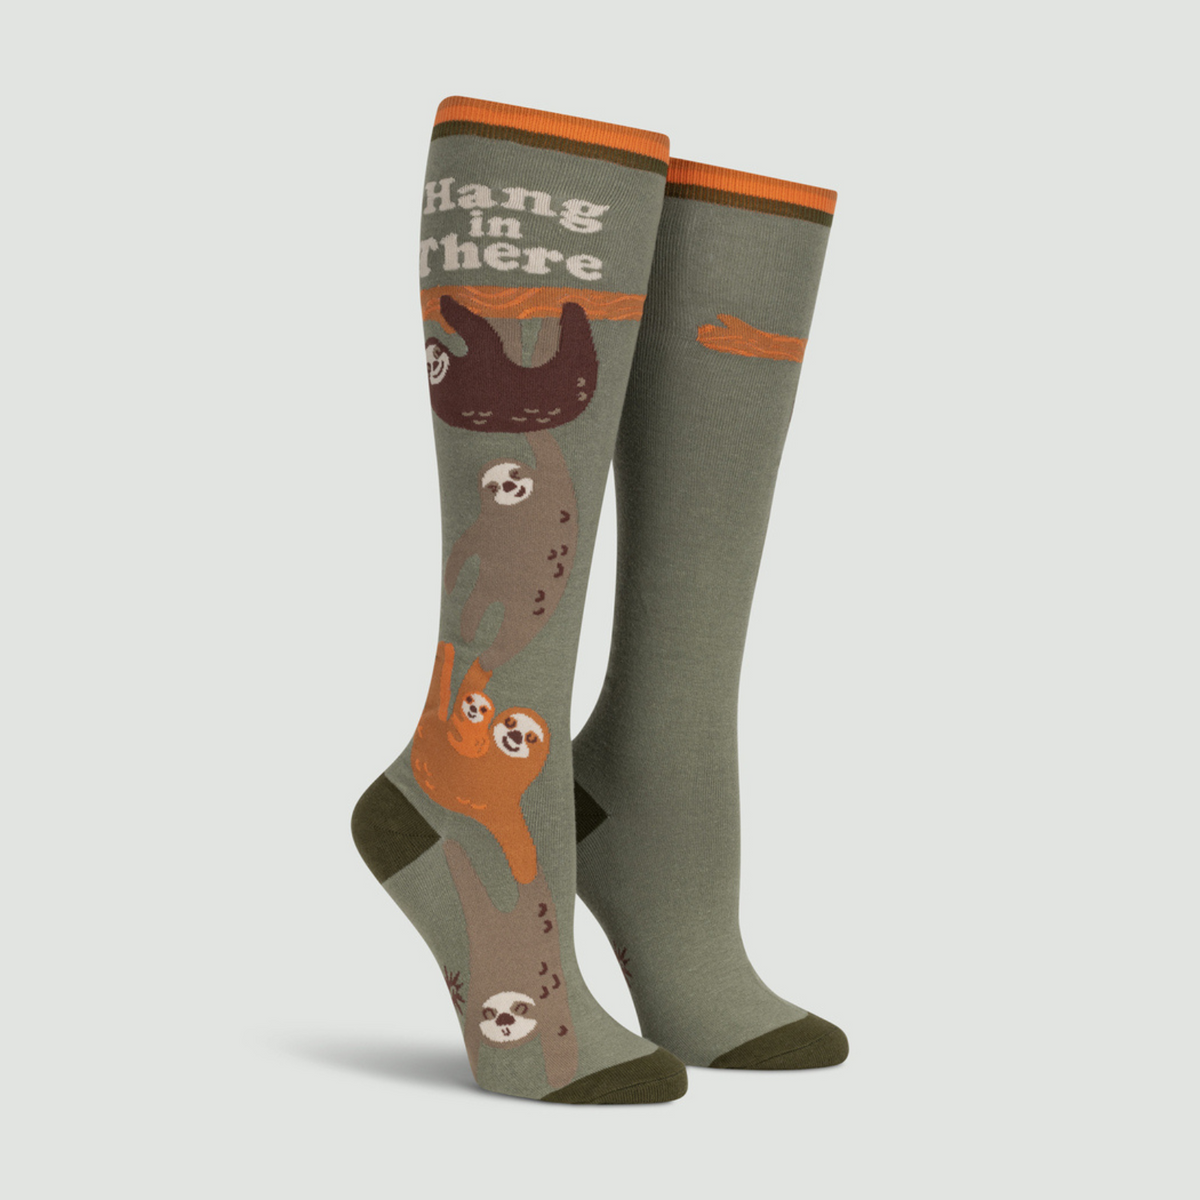 Sock It To Me Hang in There women&#39;s sock featuring brown socks with sloths and the saying &quot;hang in there&quot; on display feet